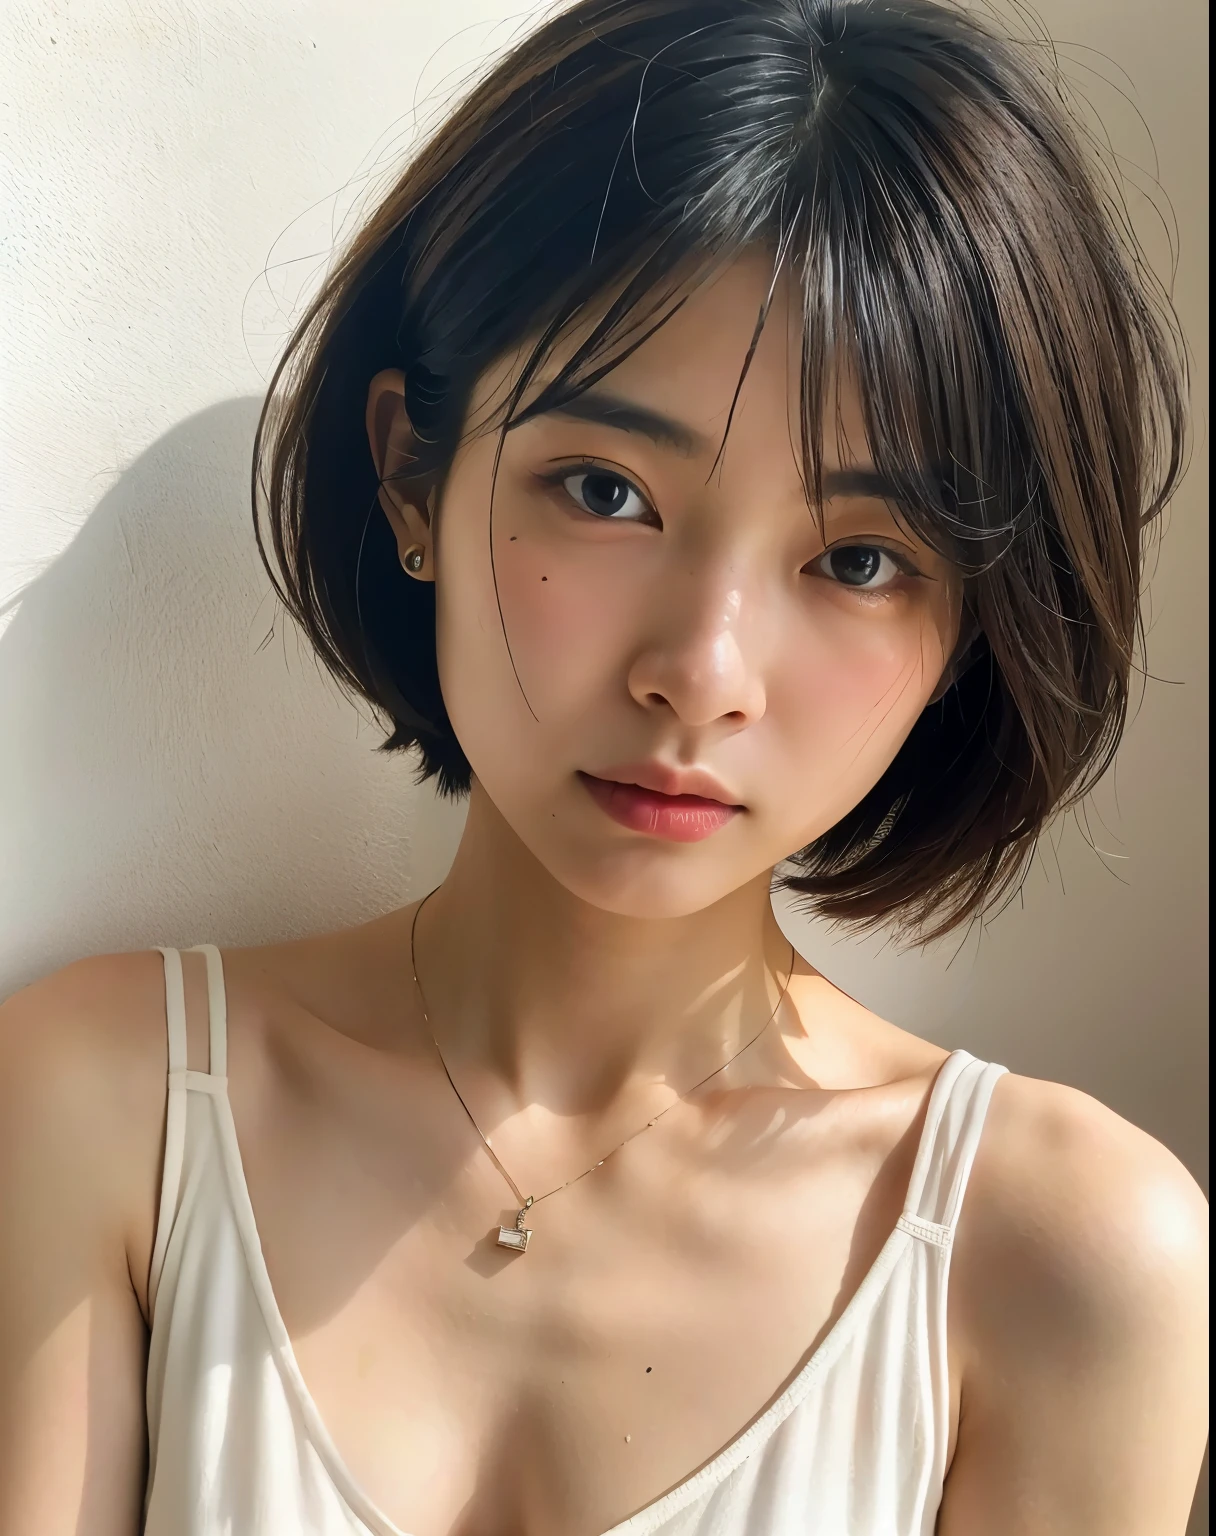 (very realistic photo, concentrated、High resolution, detailed face, fine eyes), ((Taken in front of a white wall))、japanese woman, 20-year-old, various expressions, Upper body、alone:1, slim body shape, various hairstyles,black sheer tops、Only one person is in the photo、Photographed in natural light、simple necklace、bob hair、shortcut、looking at the camera